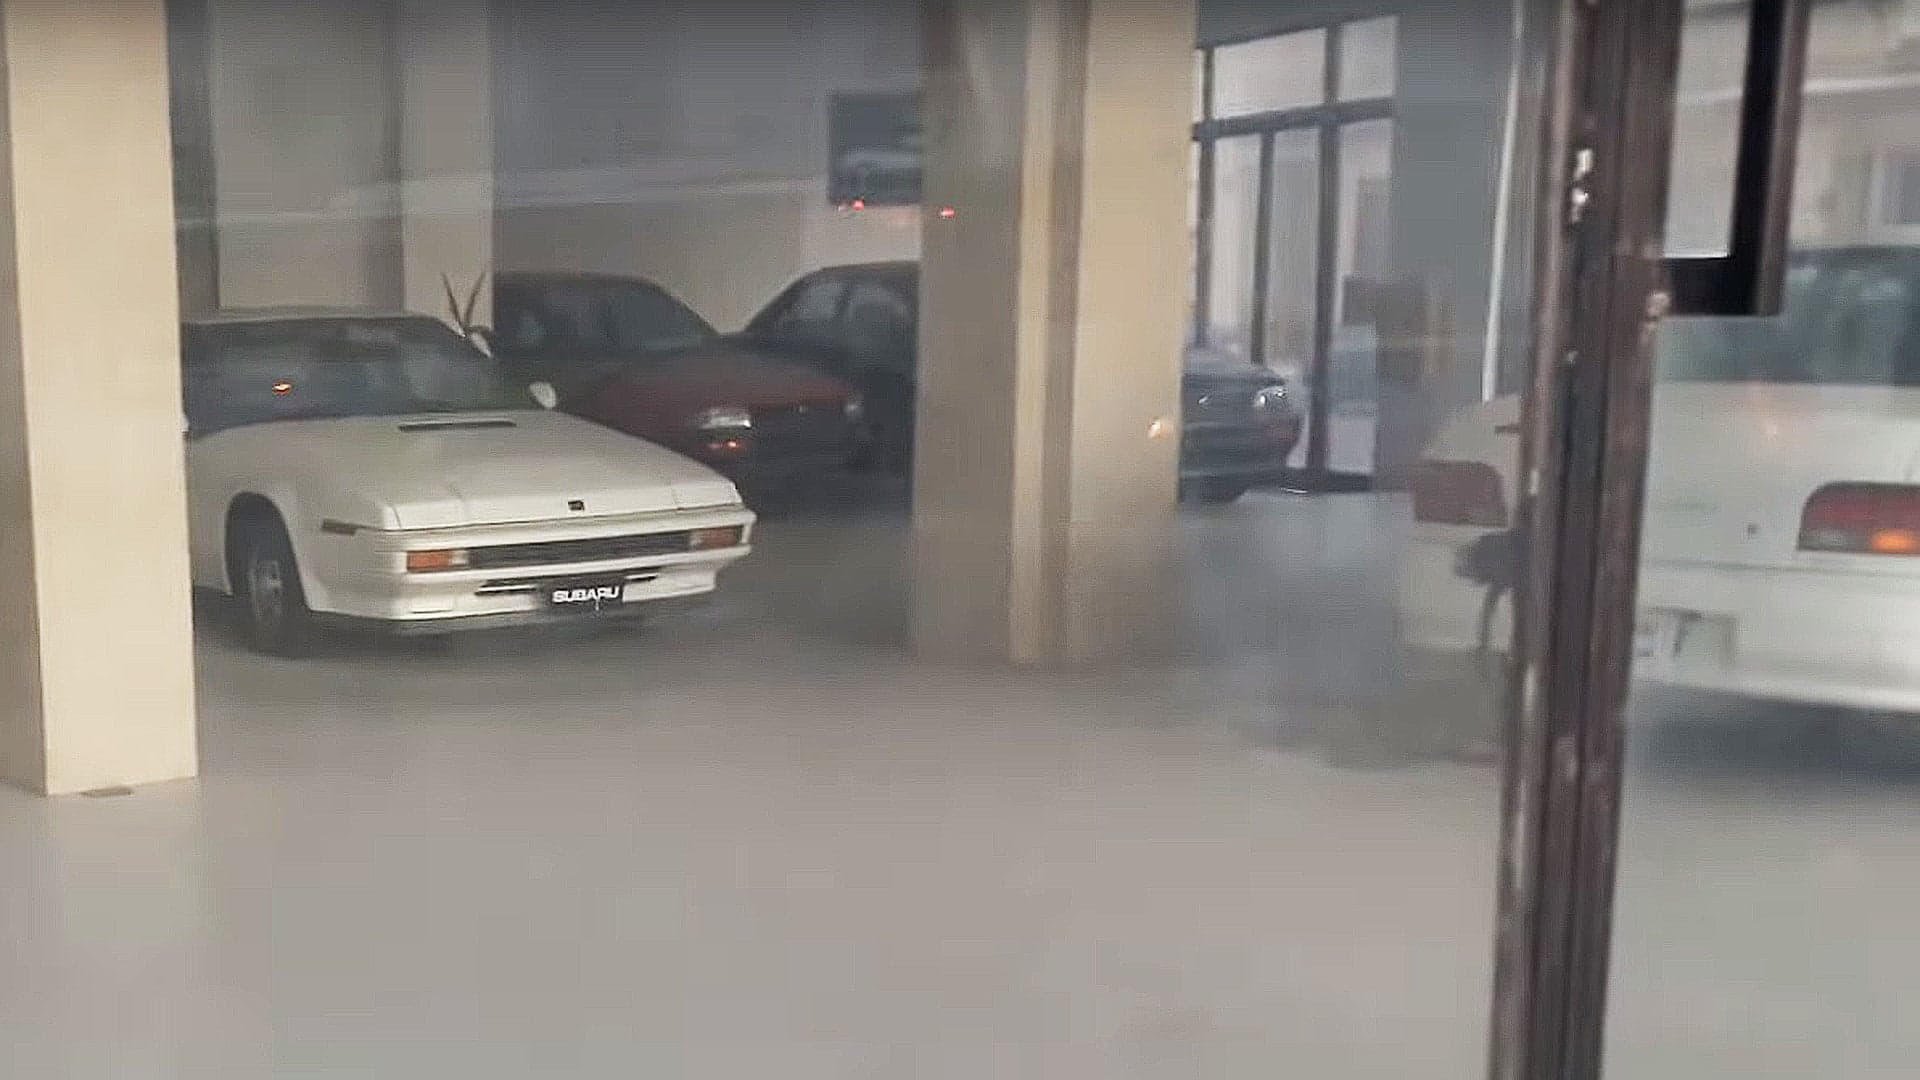 This Old Abandoned Subaru Dealership Is Full of Pristine Time Capsule Cars